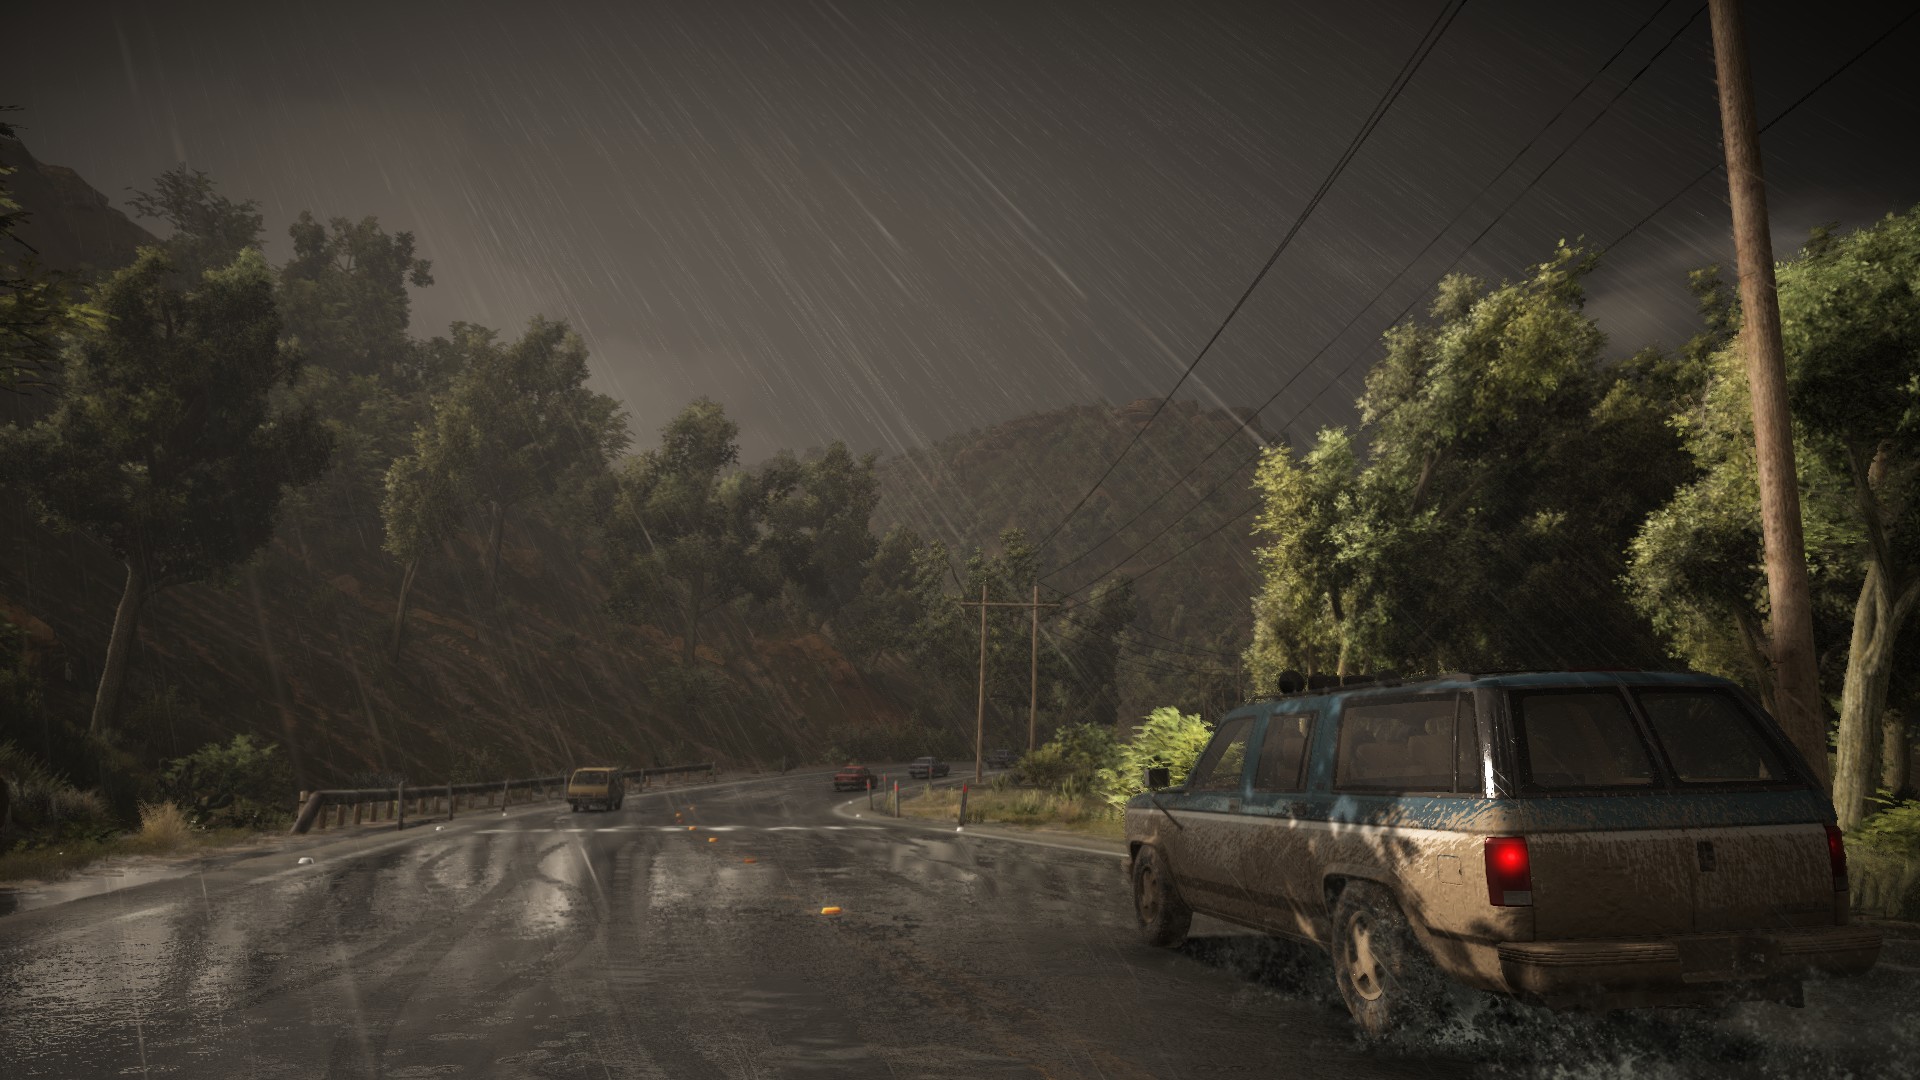 General 1920x1080 Ghost Recon Wildlands soldier video games Ubisoft road rain video game art screen shot vehicle CGI sky taillights power lines car trees wet road